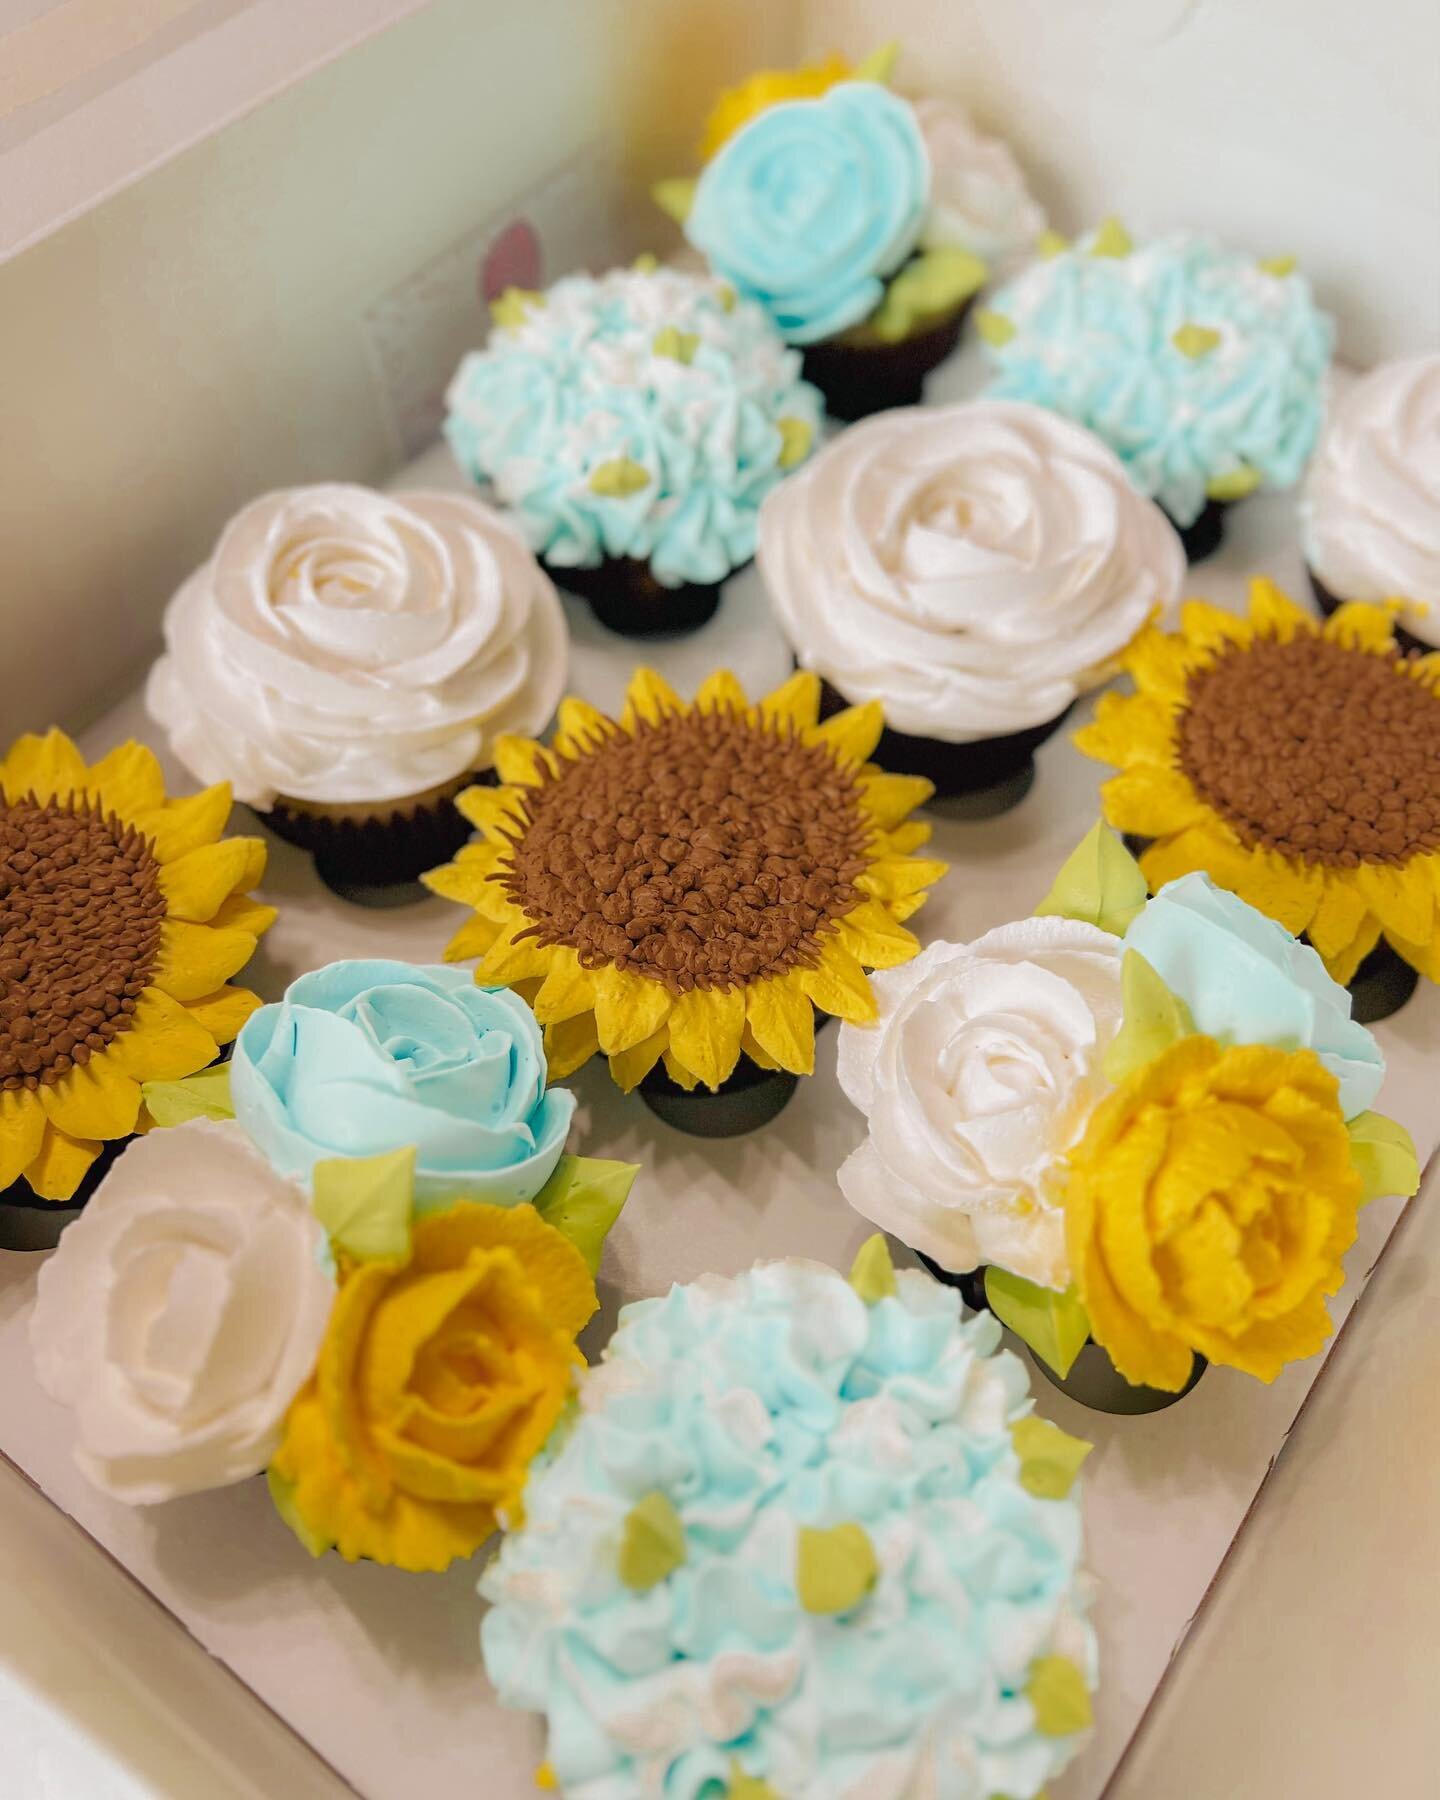 🌻🧁 Blooming with flavor this fall season! 🍂🍁 These cupcakes are like little bursts of sunshine on these crisp autumn days.

Indulge in the warm embrace of my seasonal favorites, from pumpkin spice to butter pecan. Each bite is a taste of fall mag